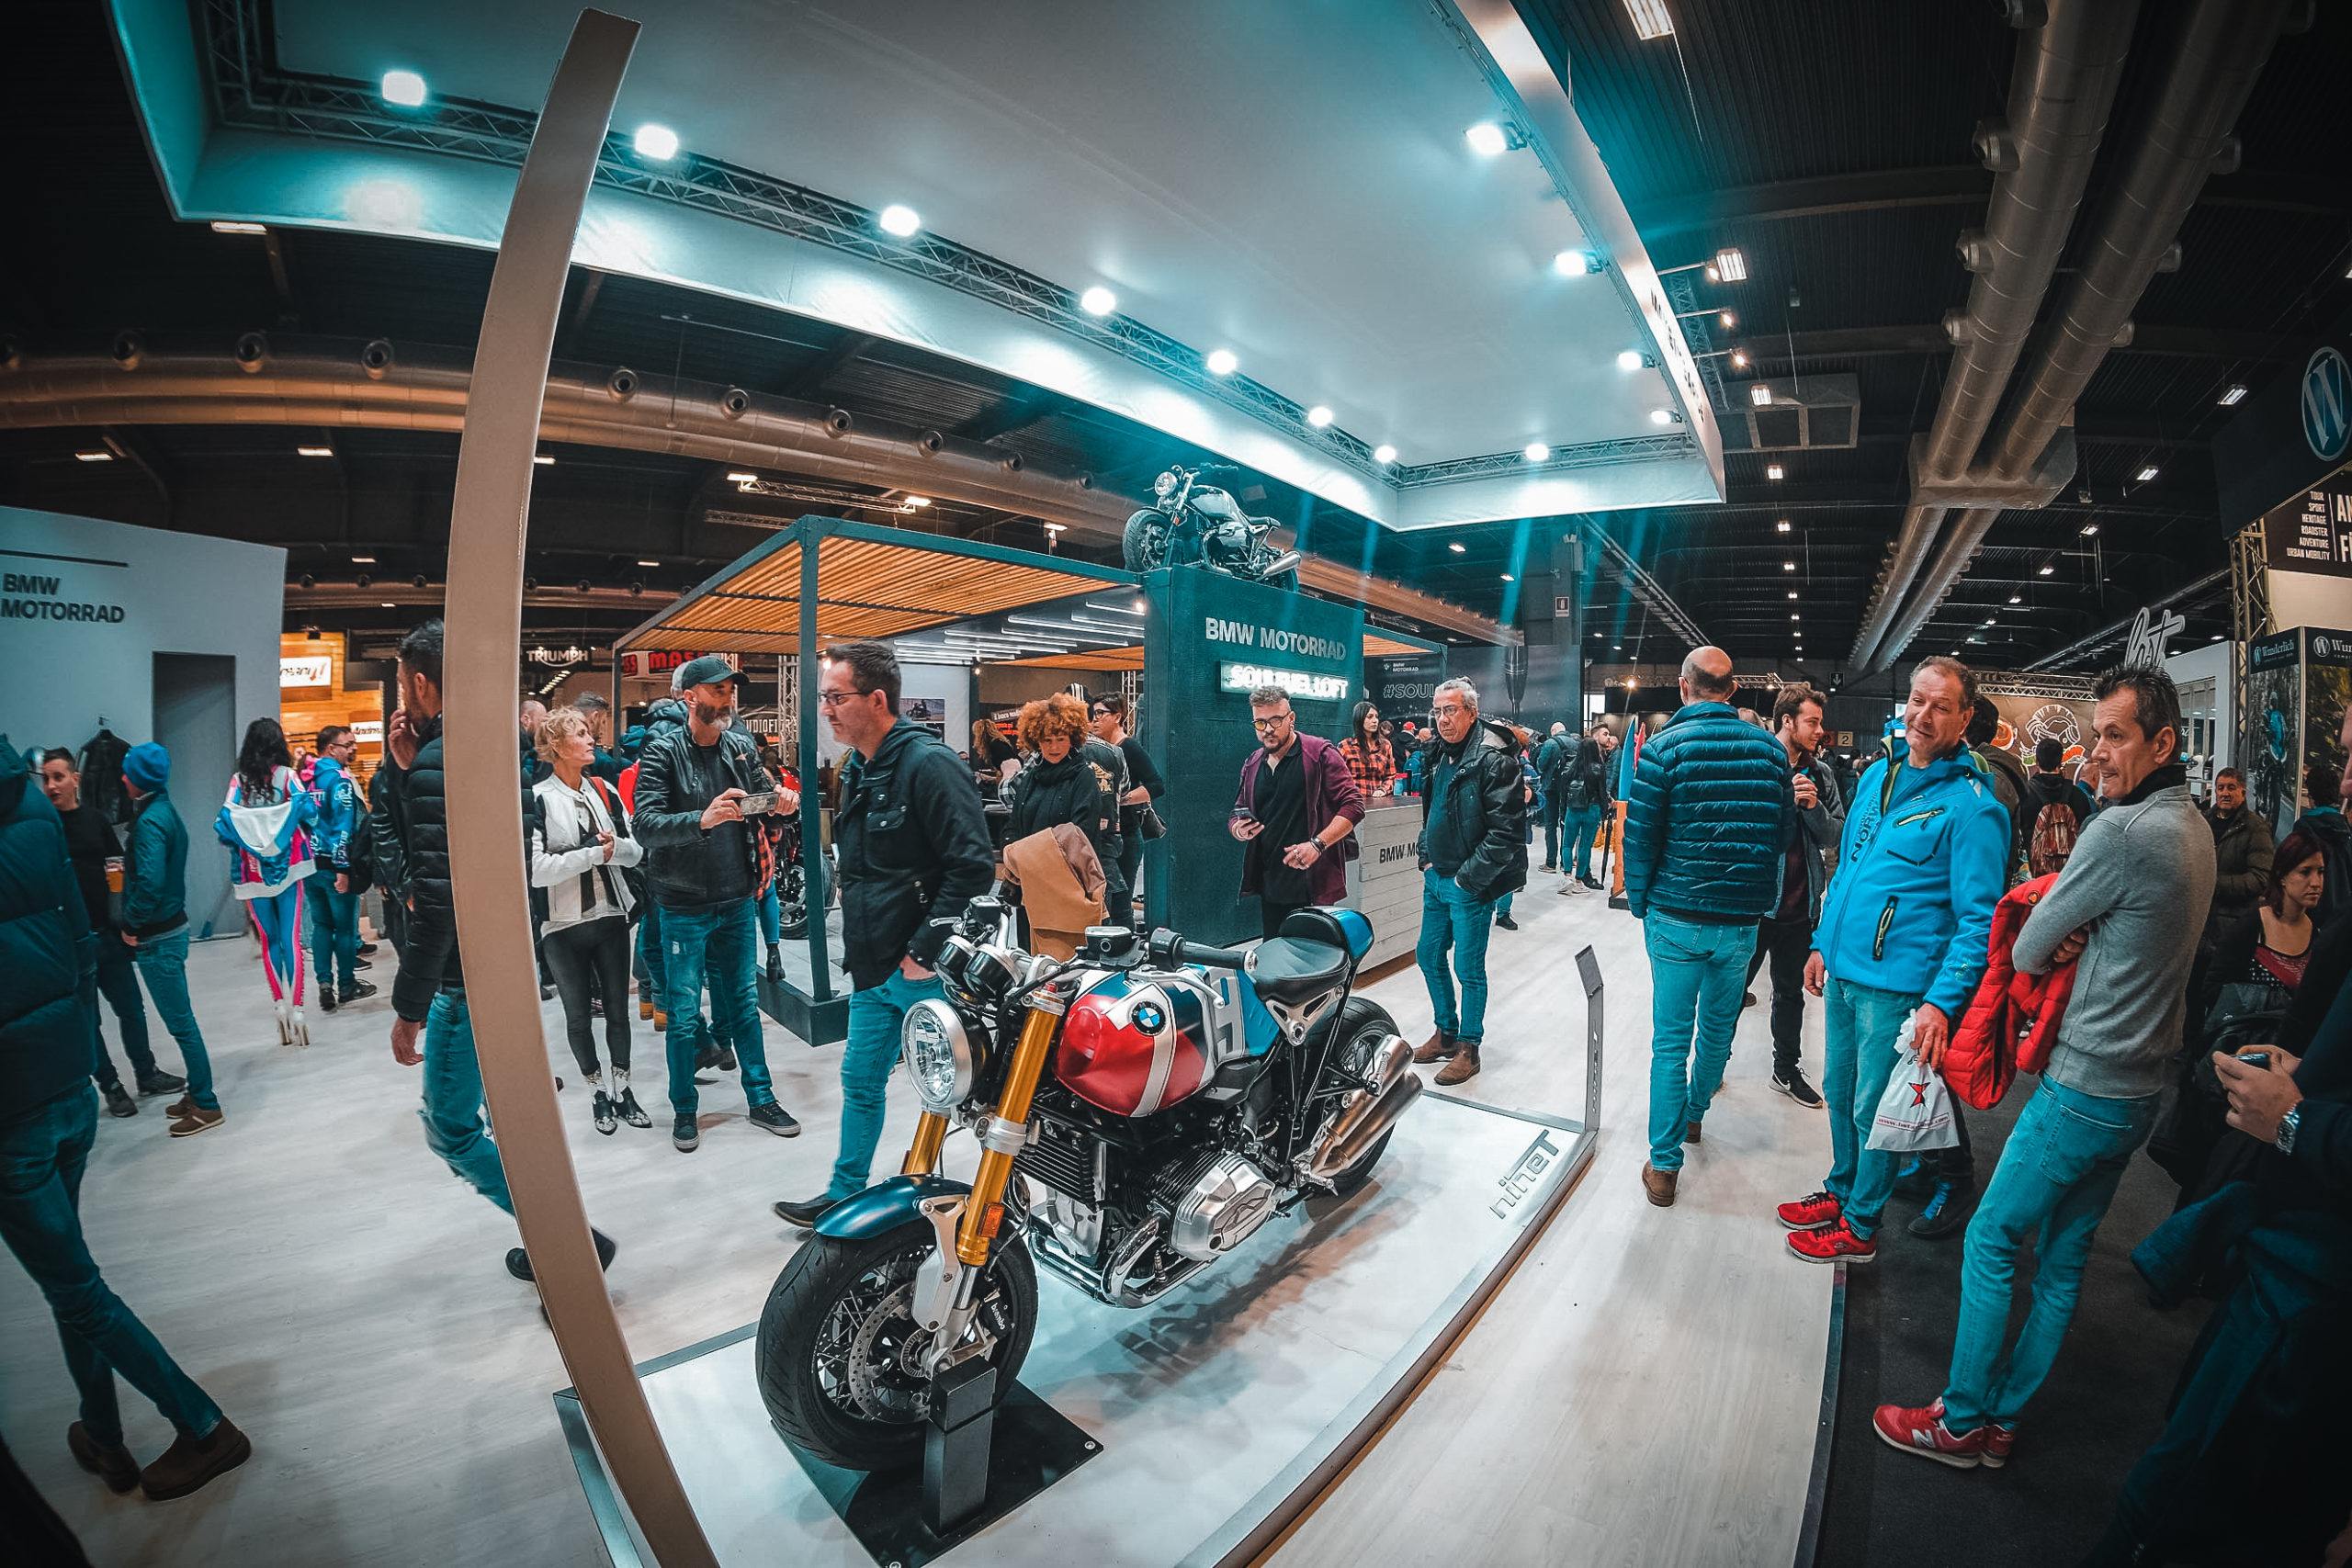 2021 Motor Bike Expo Dates Adrenaline Culture of Motorcycle and Speed